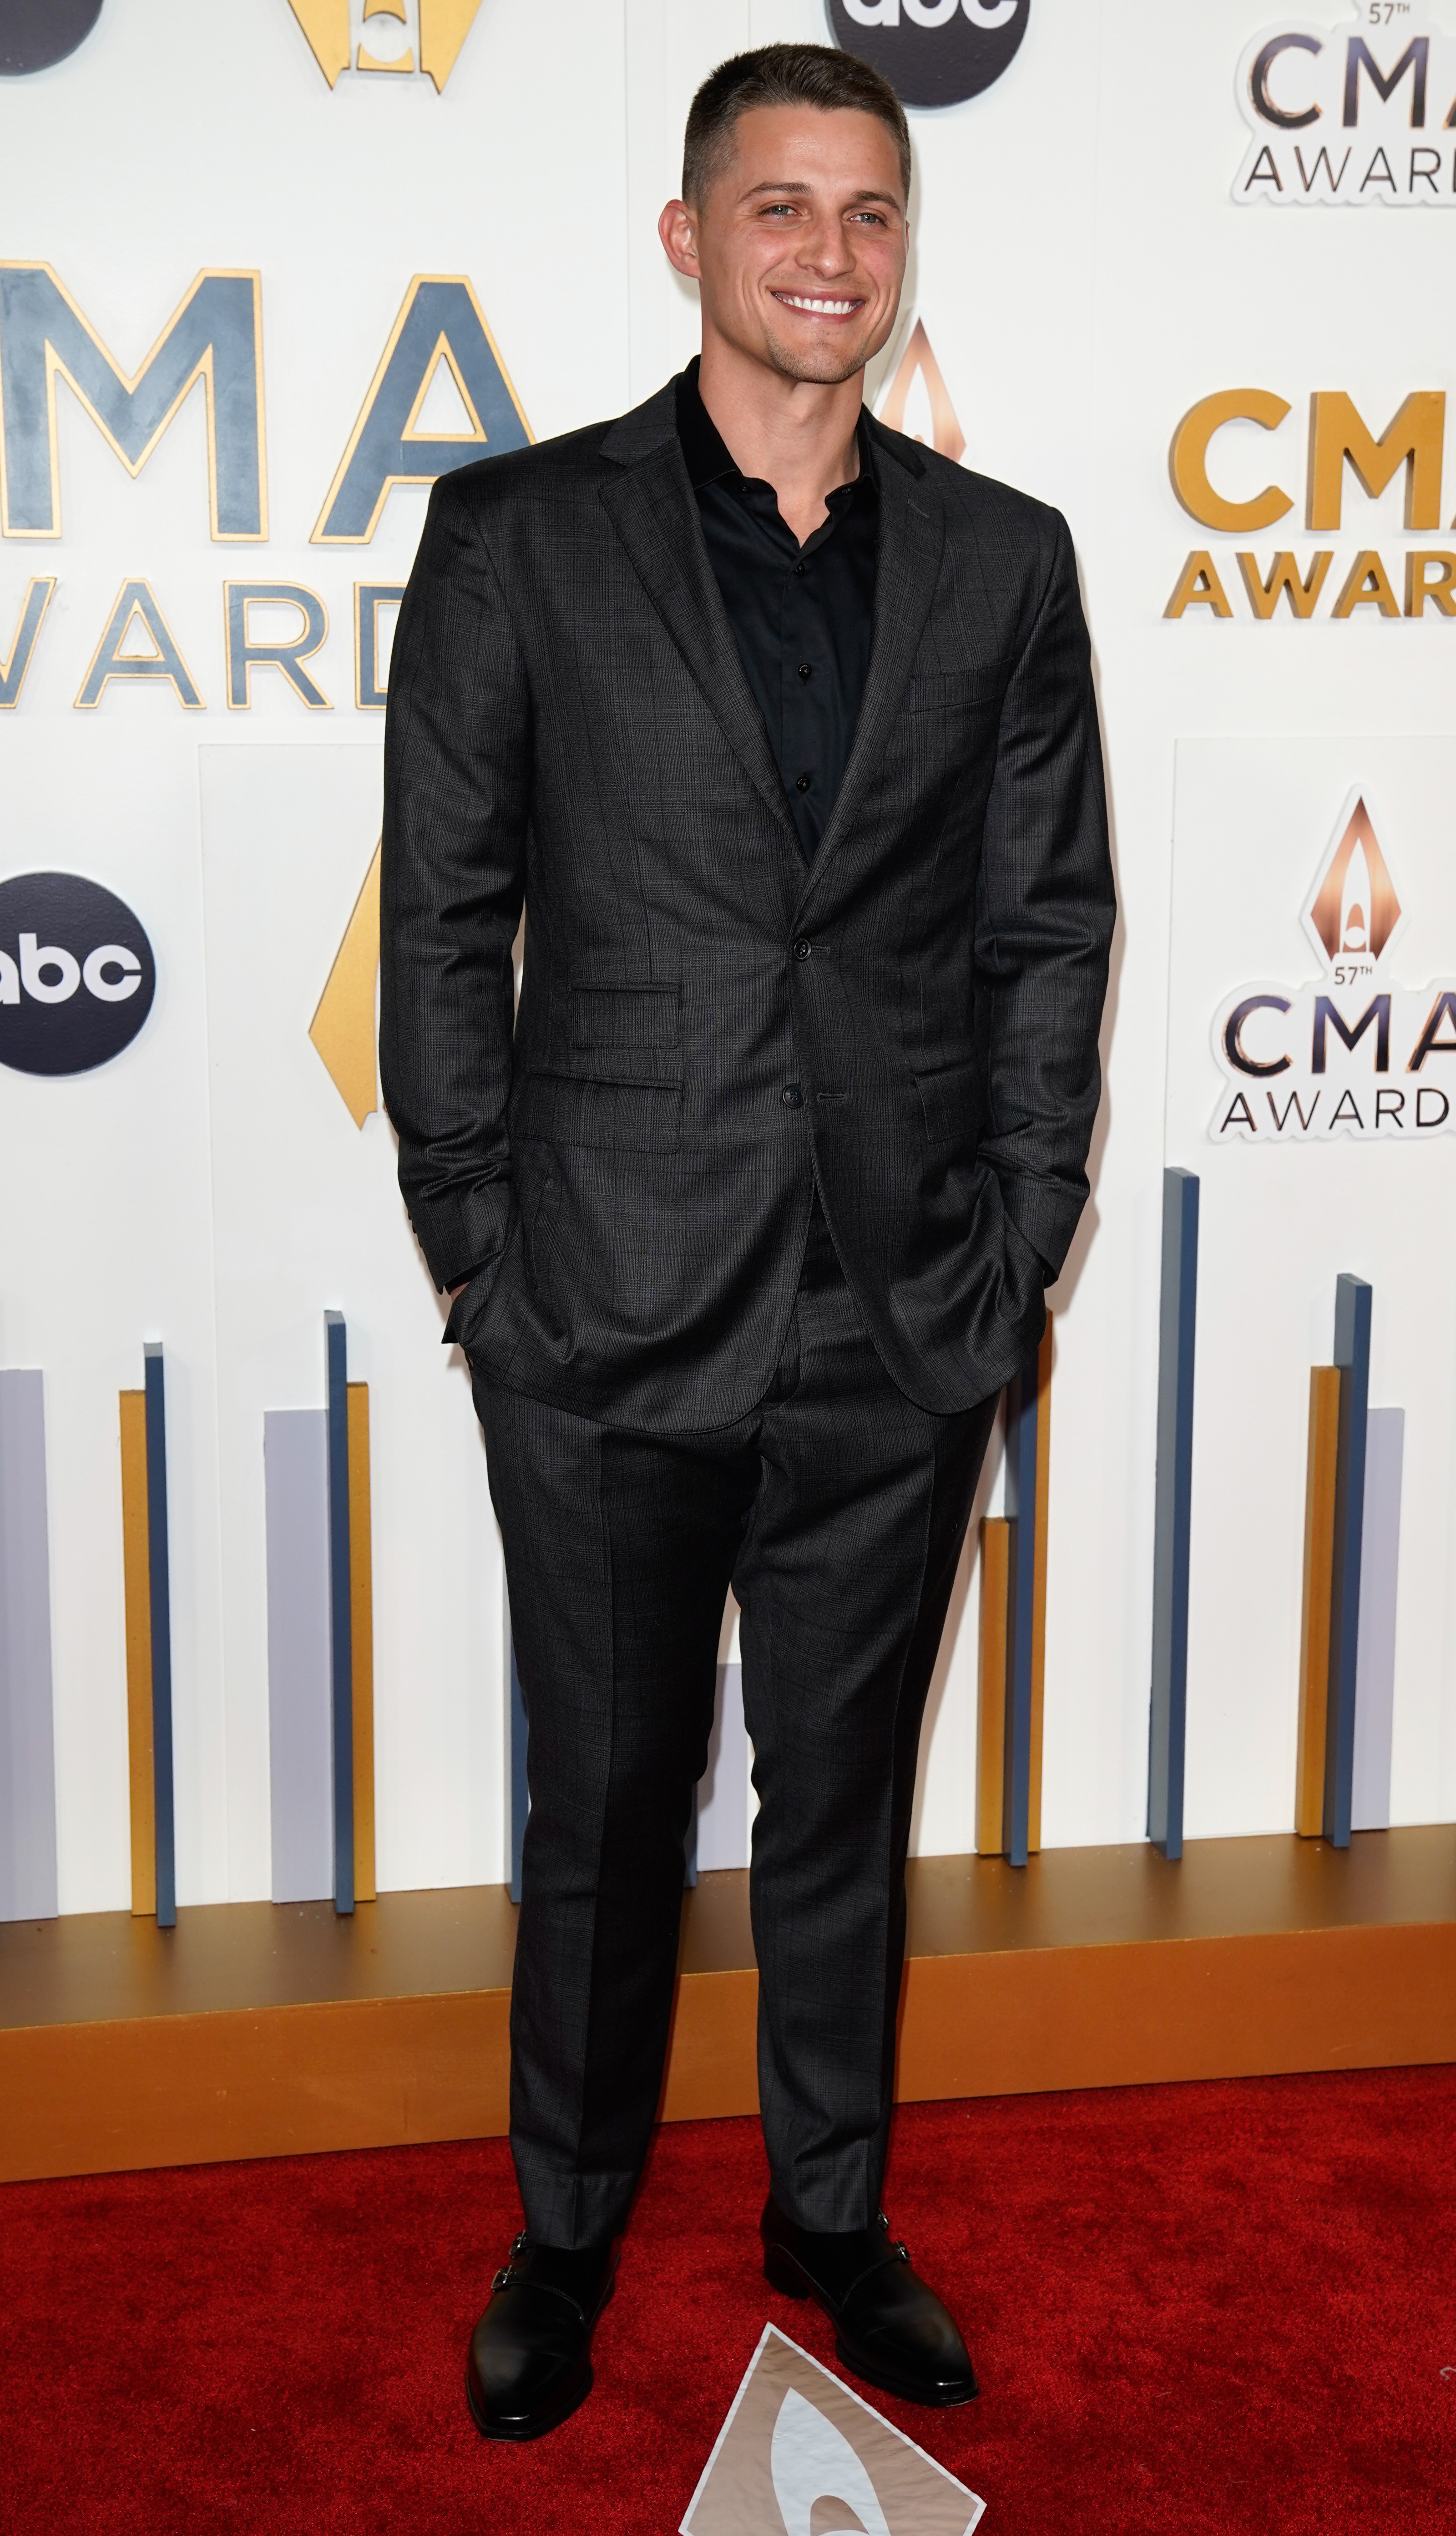 Entertainment: 57th Annual Country Music Association Awards - Red Carpet